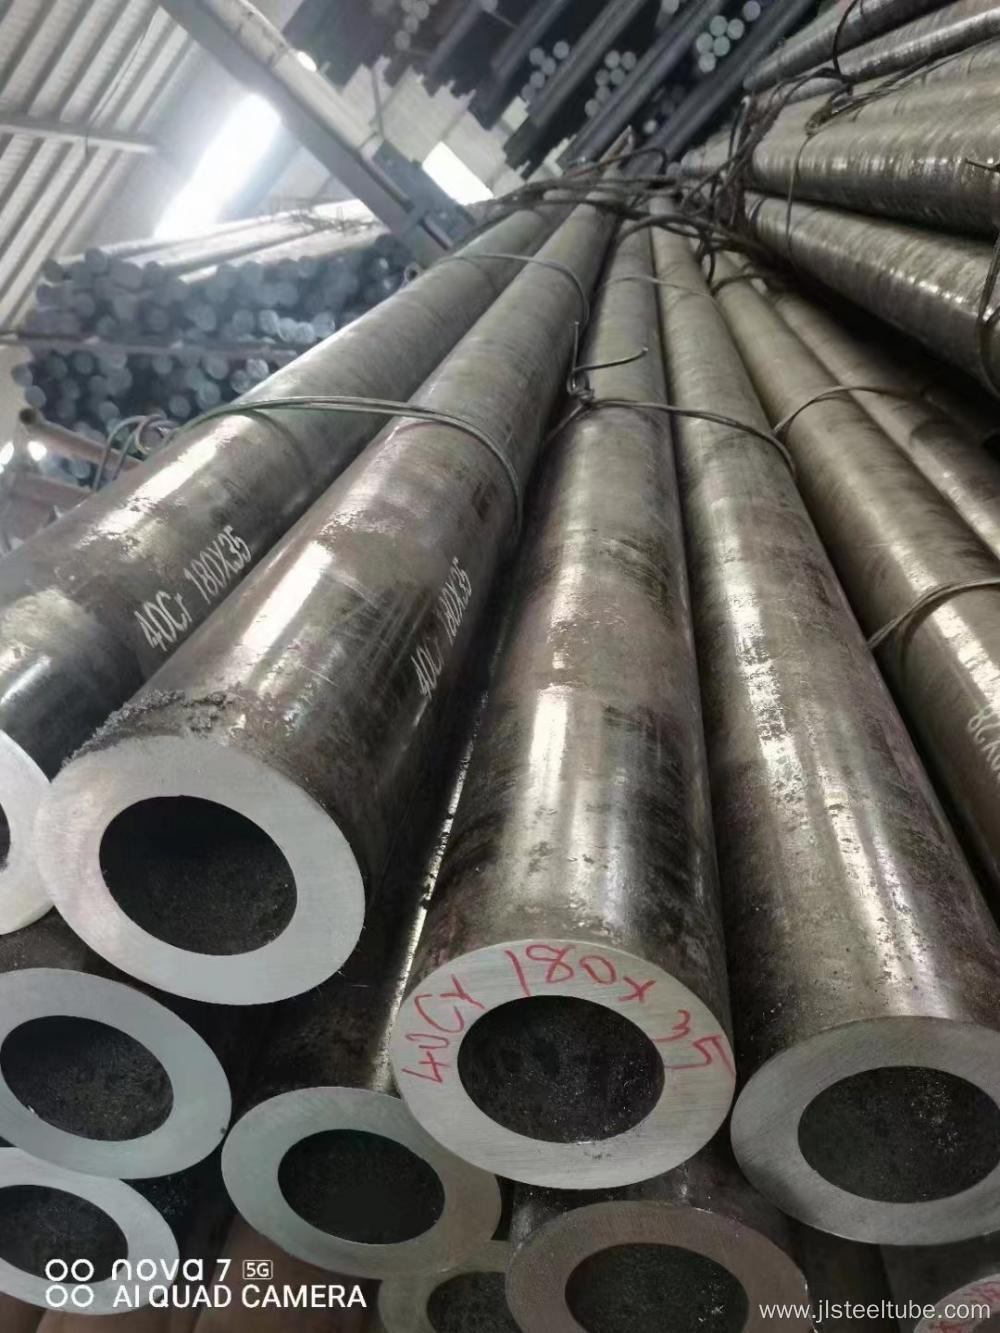 Seamless Hollow Structural Steel Tube Pipe for Sale